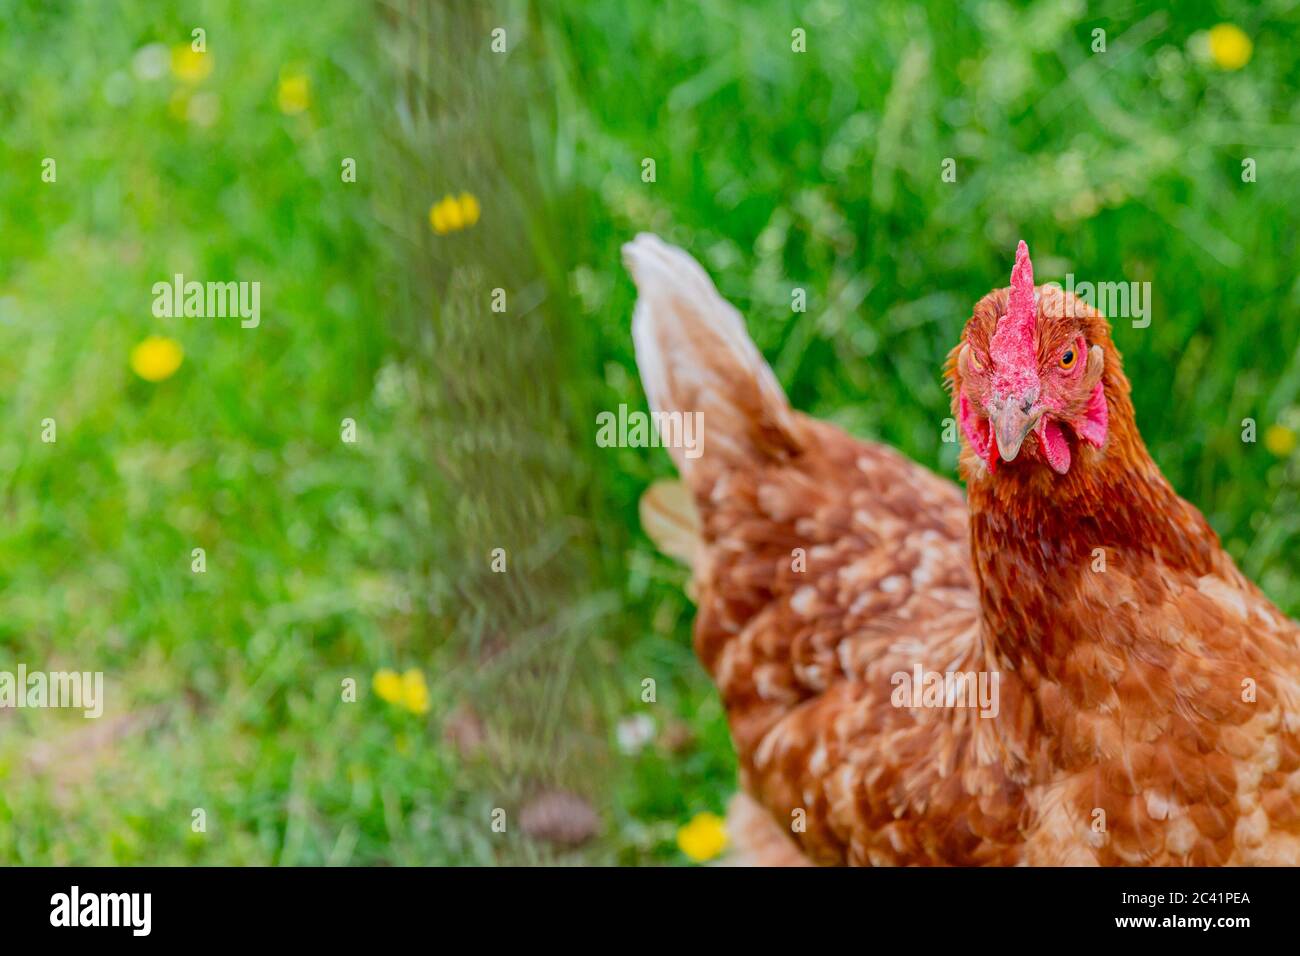 Close up of a red Shaver chicken with a reddish-brown in color on an organic farm with green grass on a blurred background Stock Photo